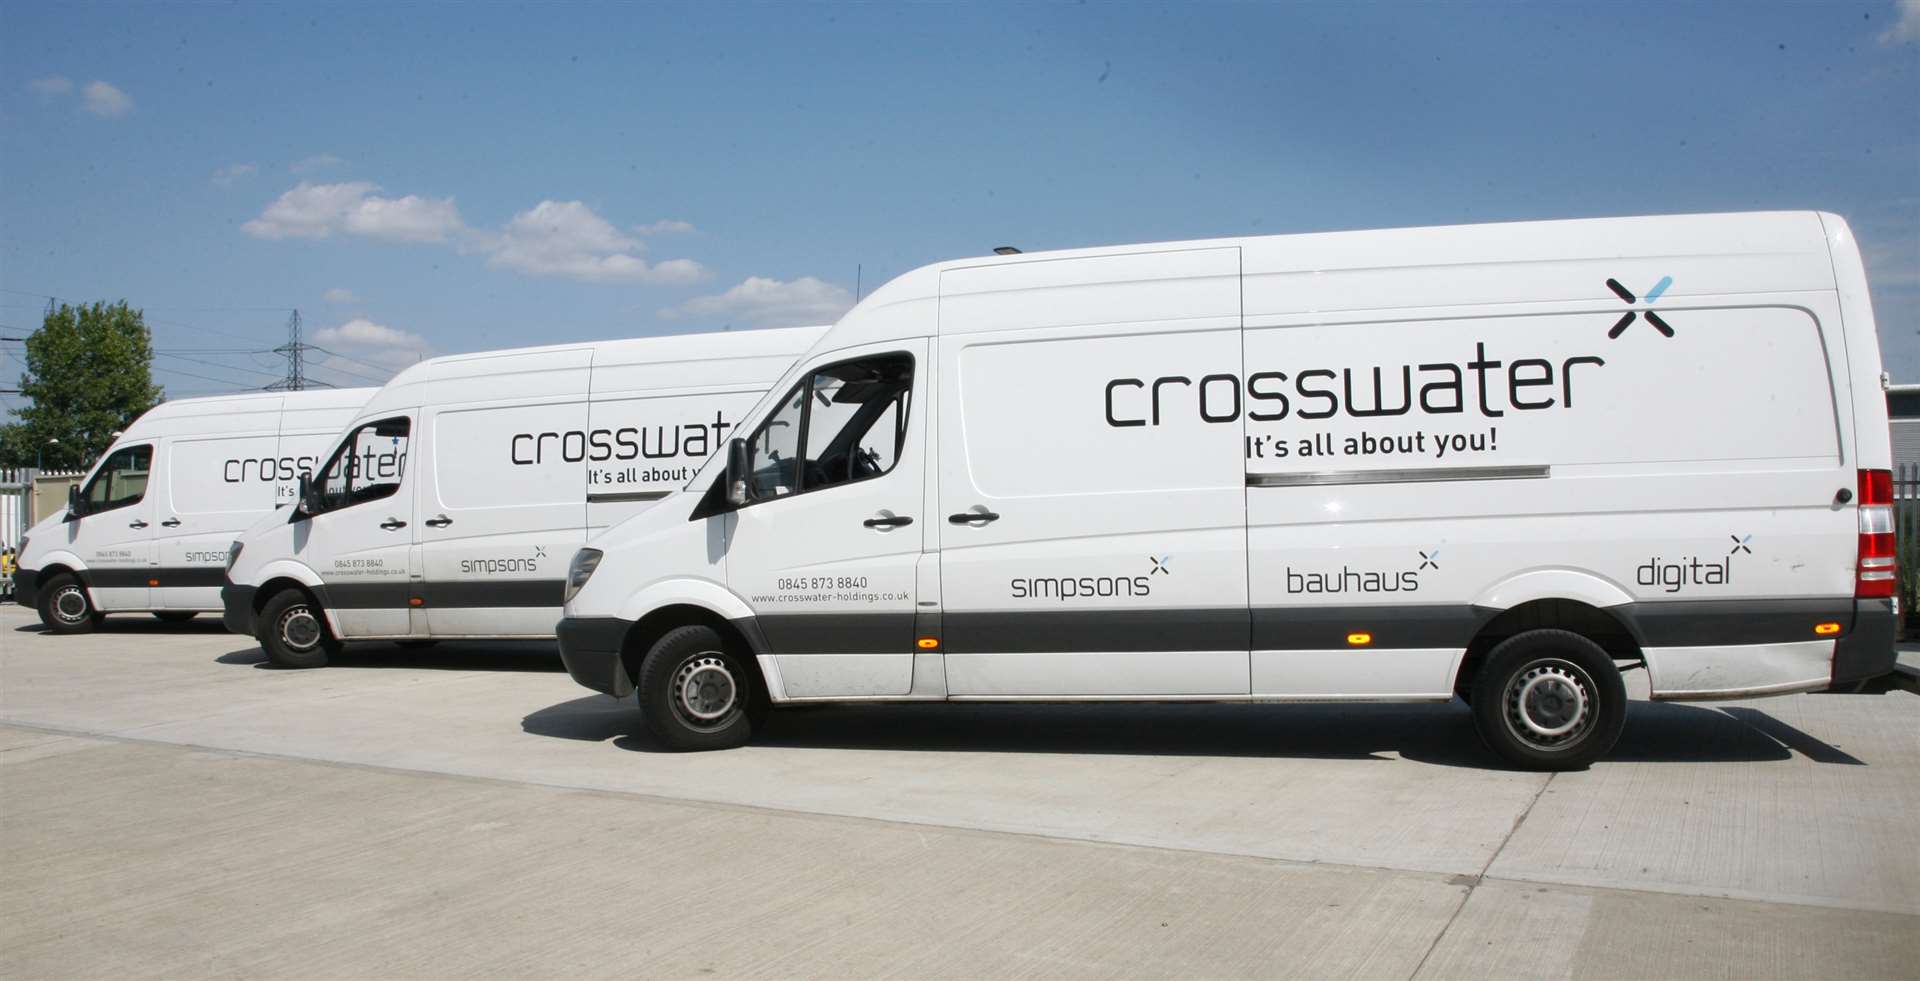 Crosswater has saved nearly £65,000 on its fuel bill